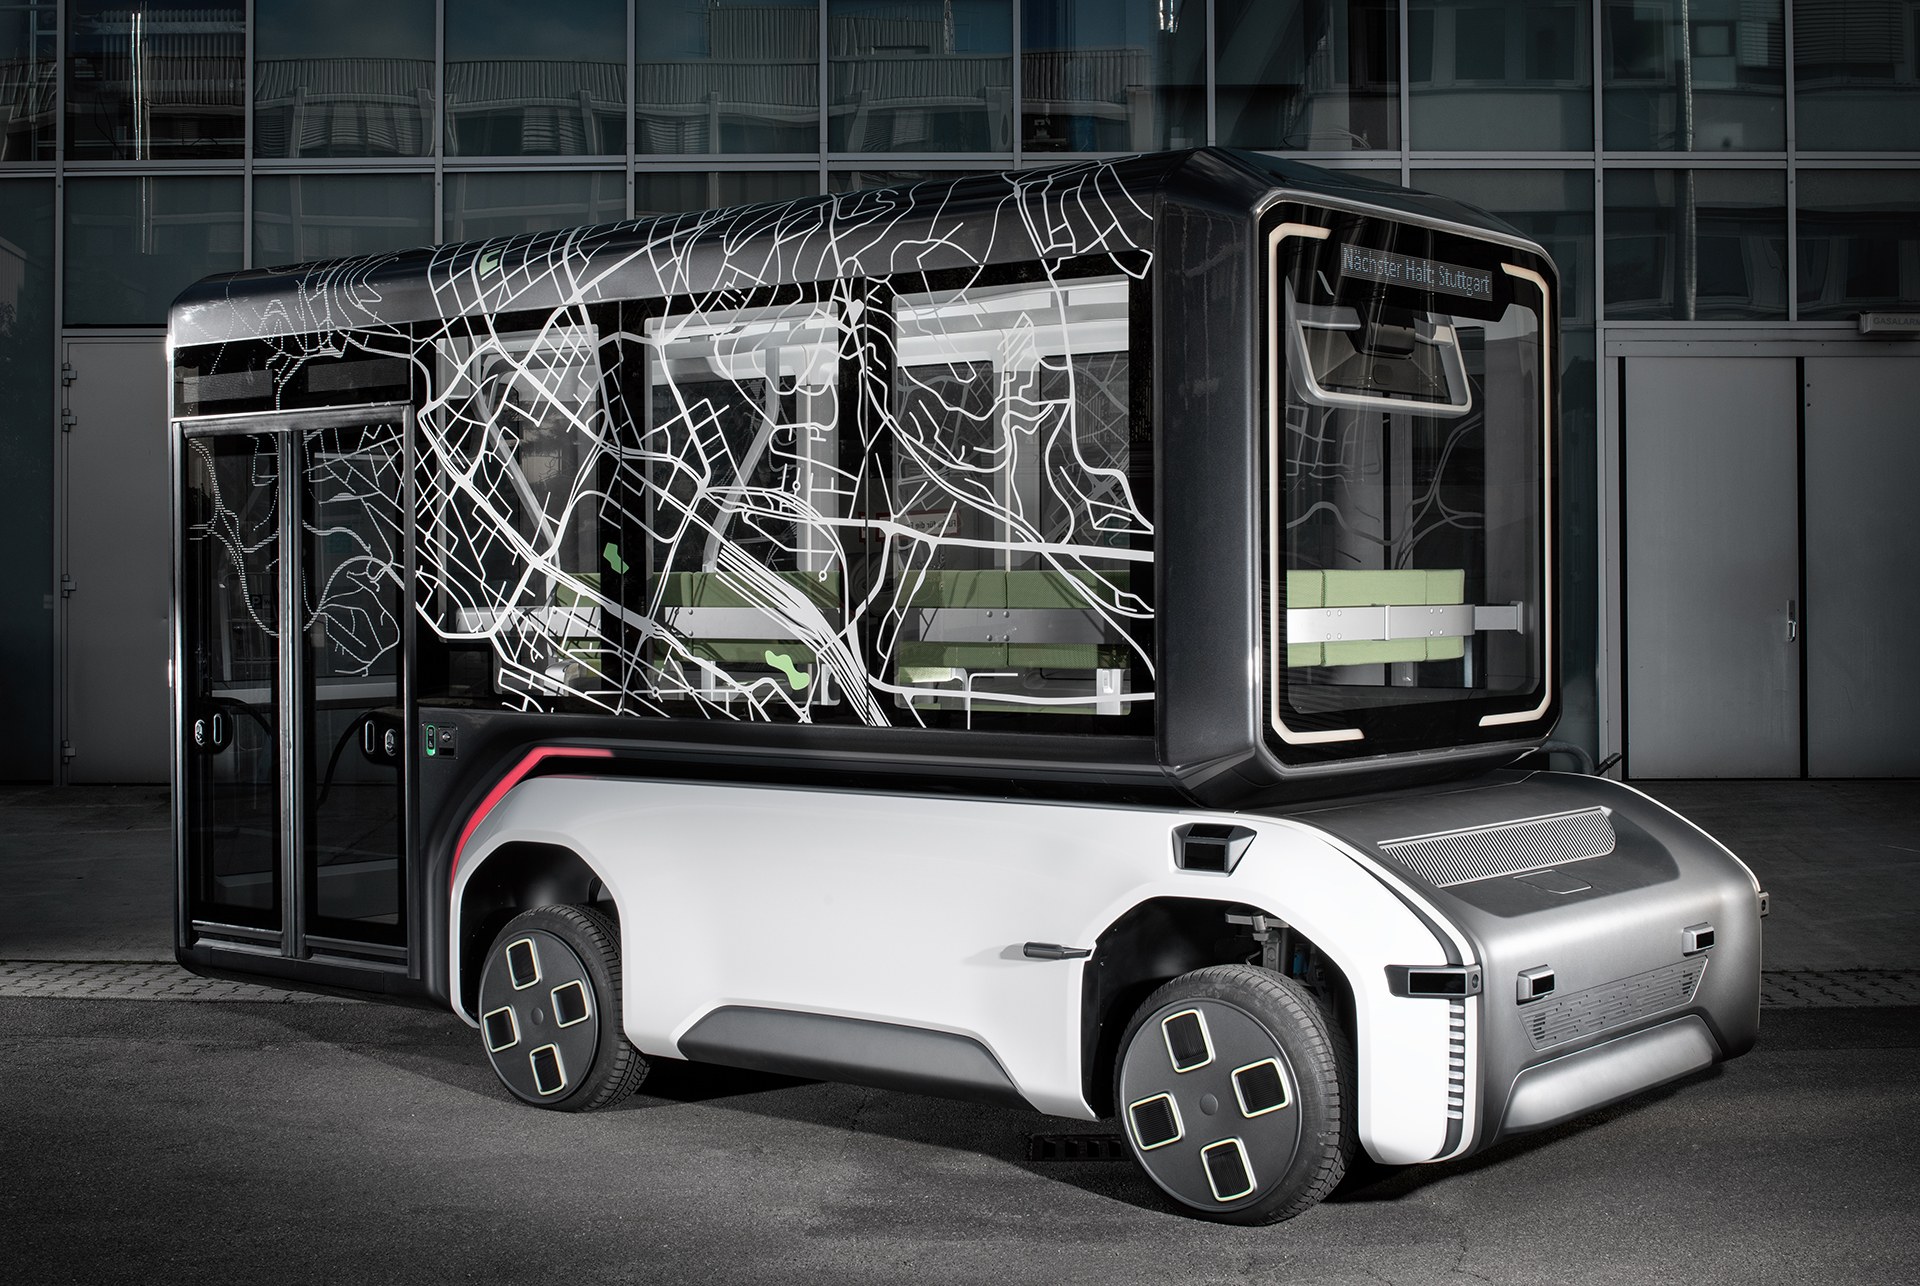 U-Shift - the future-oriented mobility concept offers flexibility